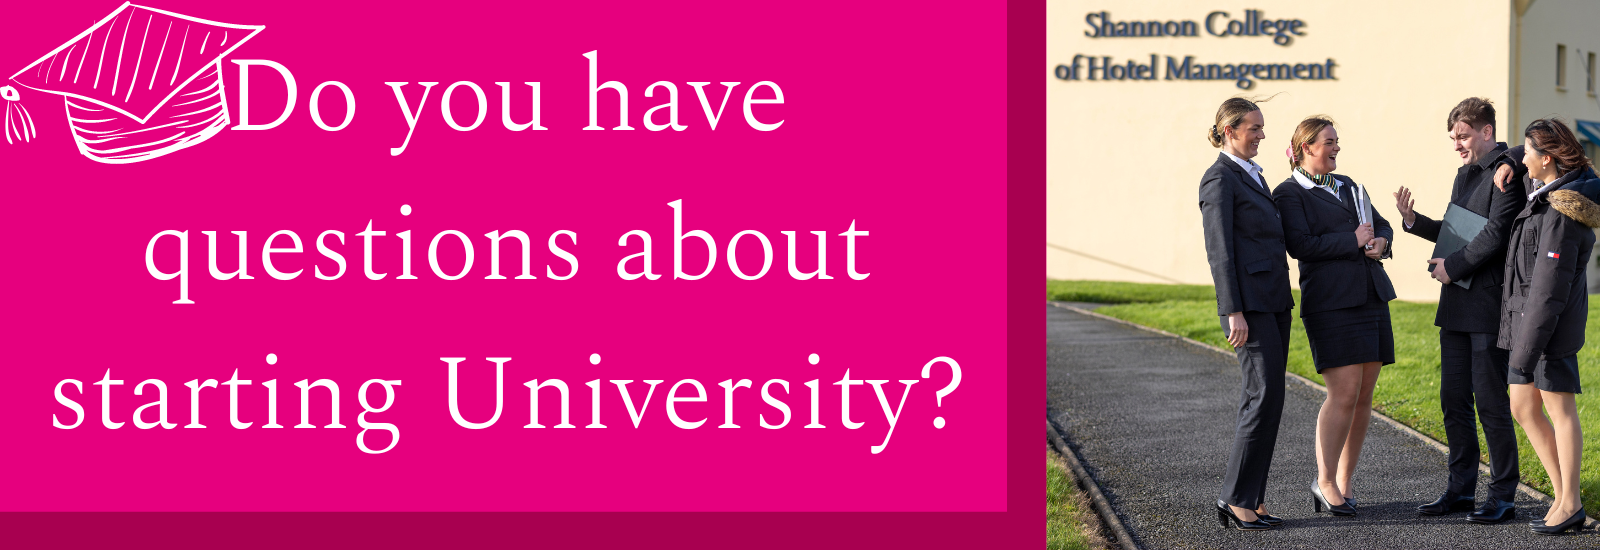 poster saying "do you have questions about starting university?"